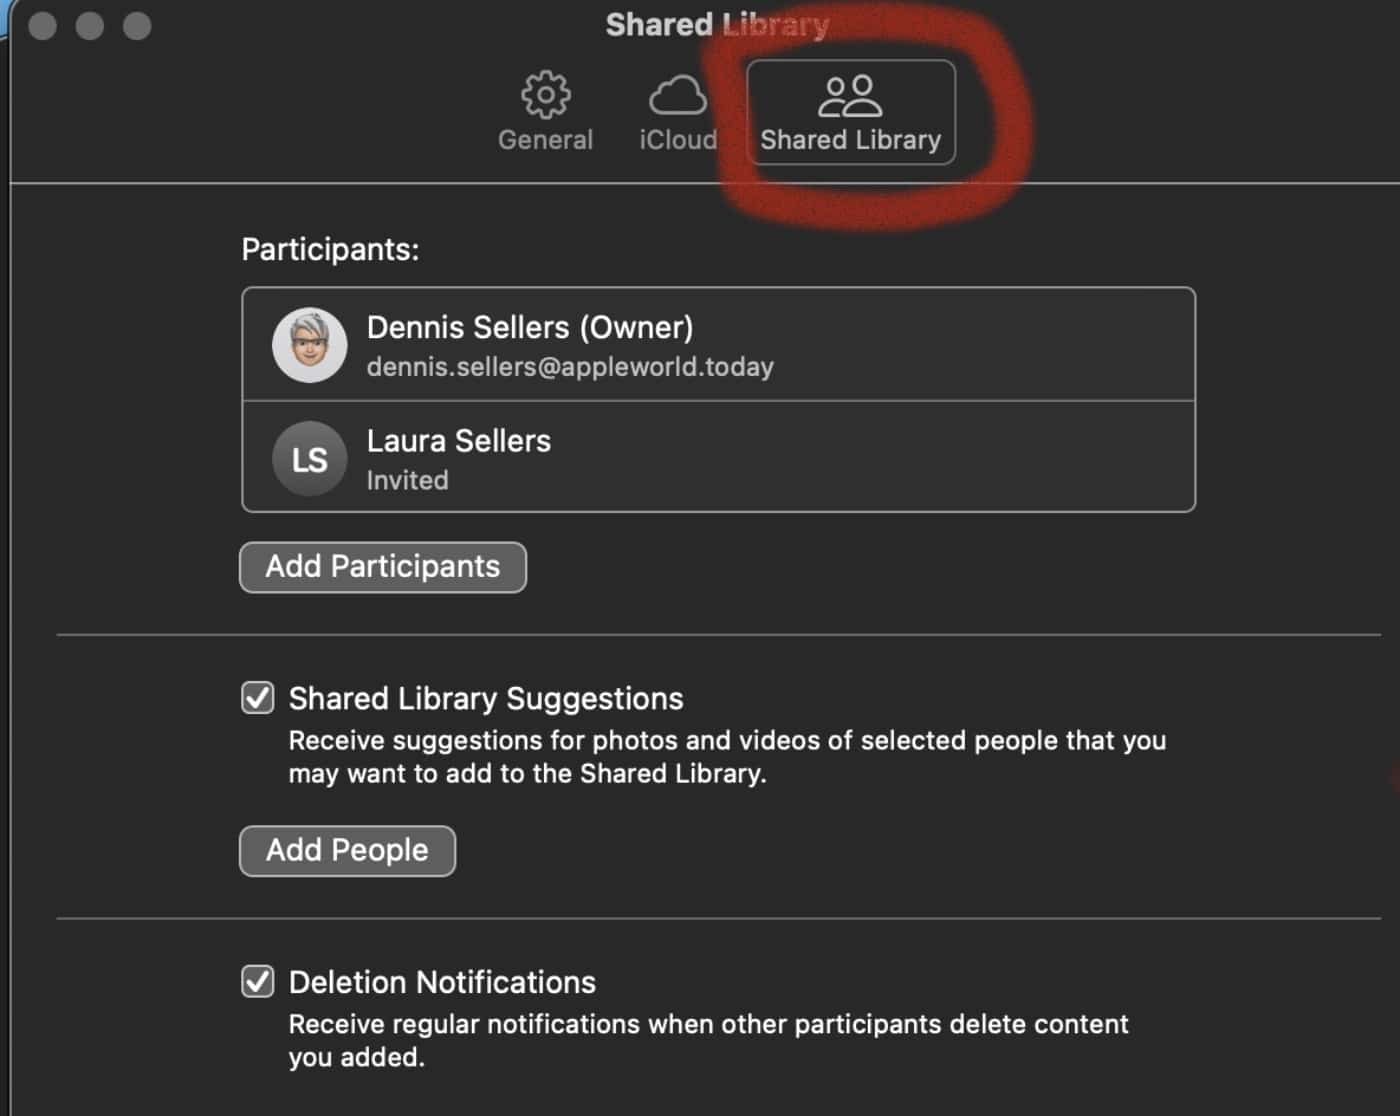 Settings > Shared Library